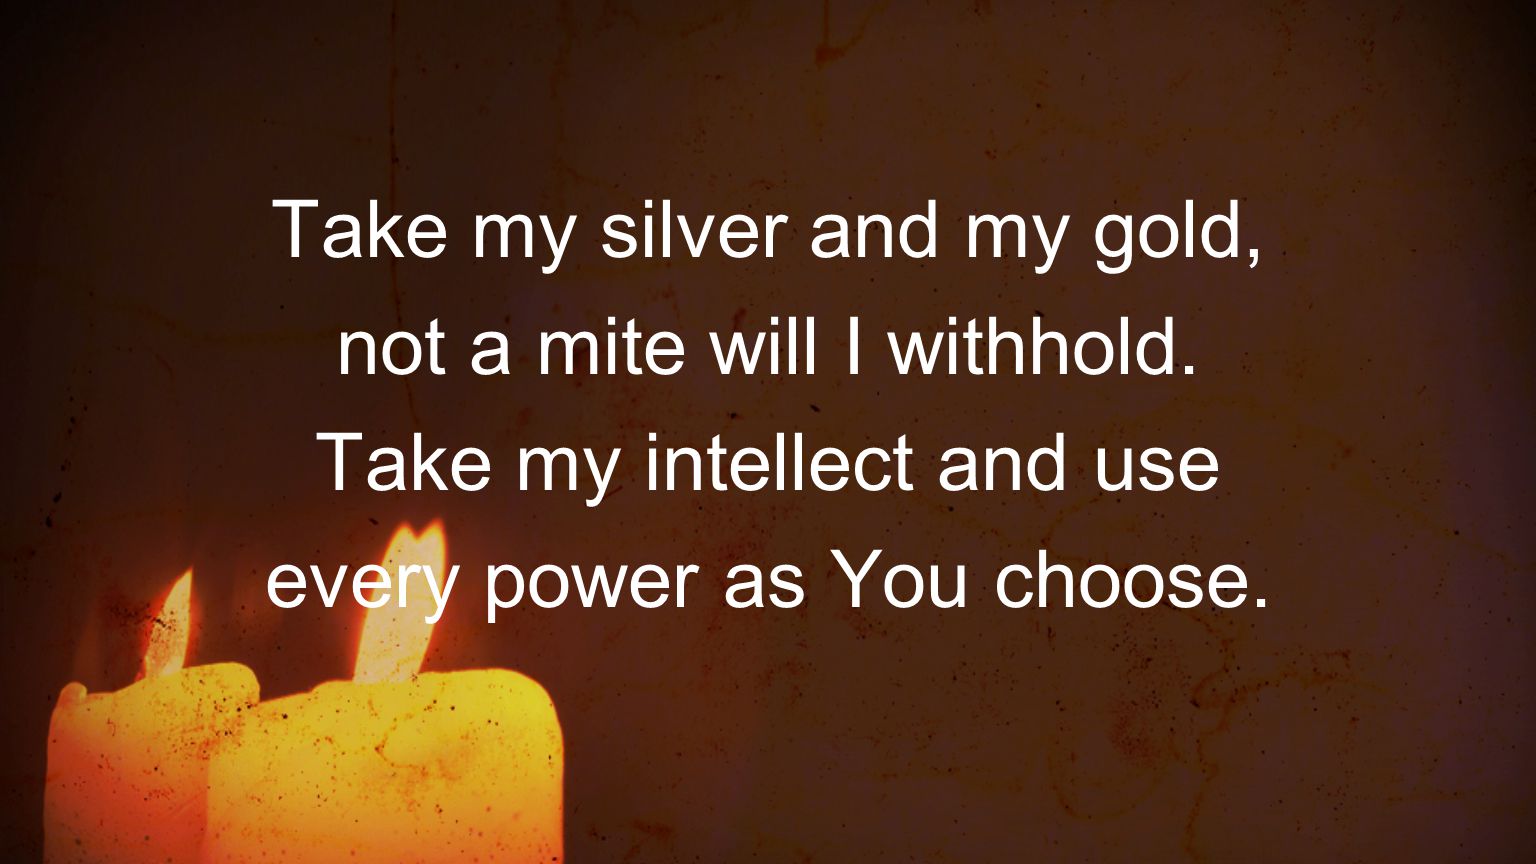 Take my silver and my gold, not a mite will I withhold.